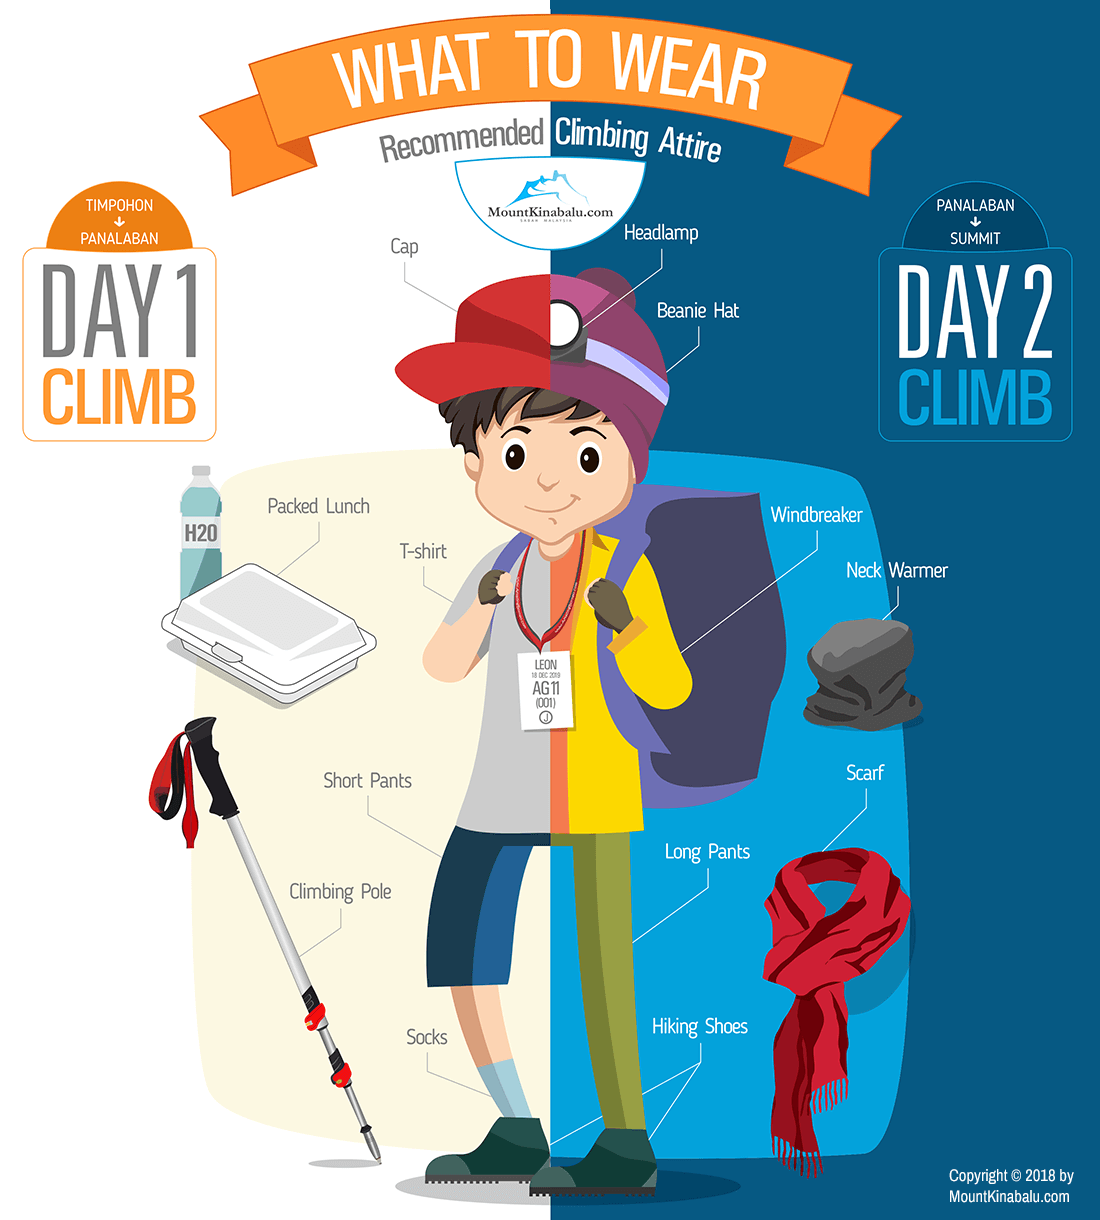 What To Wear Recommended Climbing Attire for Mount Kinabalu Day and Night Climb